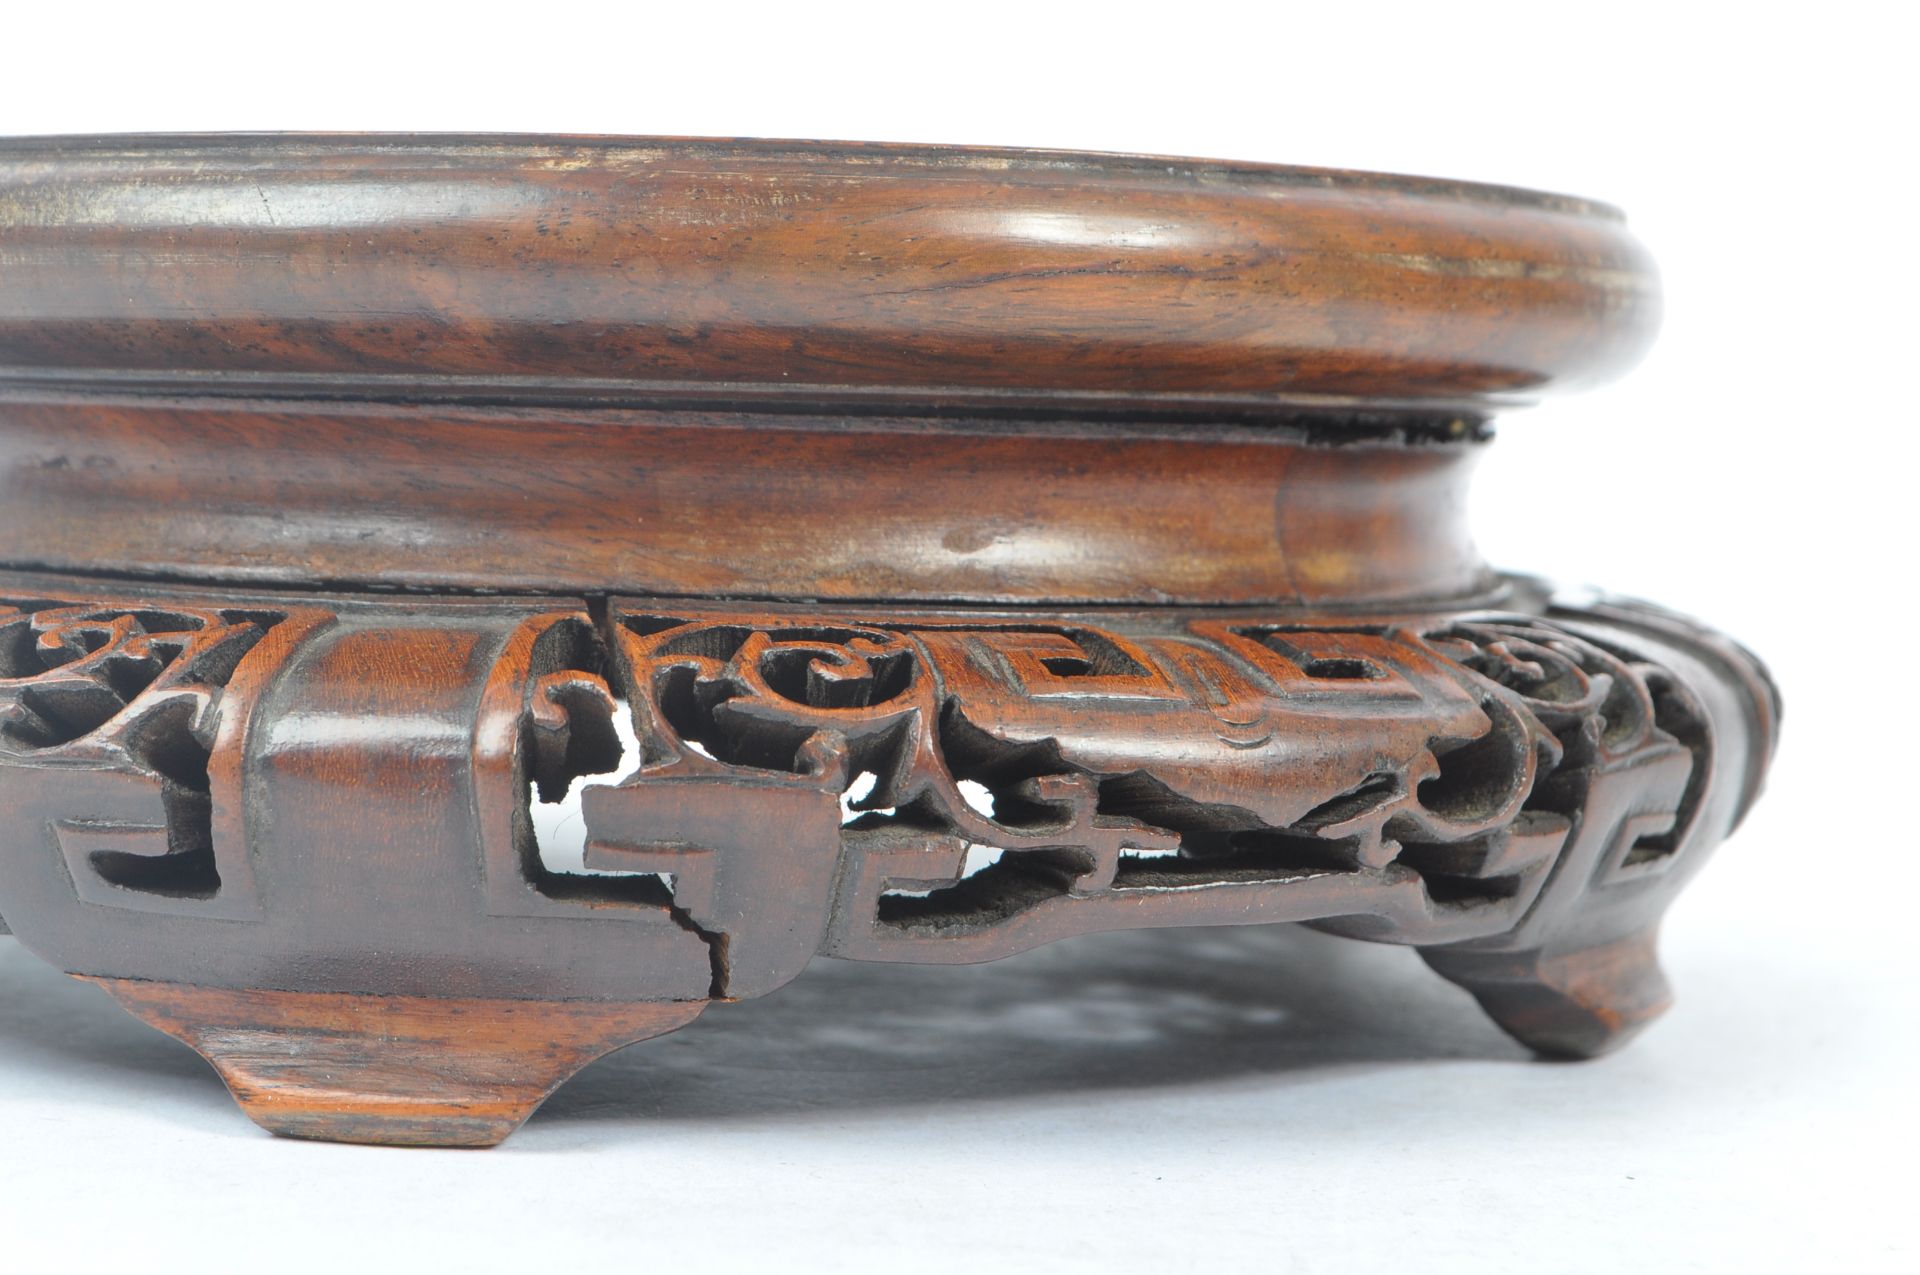 LARGE EARLY 20TH CENTURY AUCTIONEER'S GAVEL & STAND - Image 4 of 6